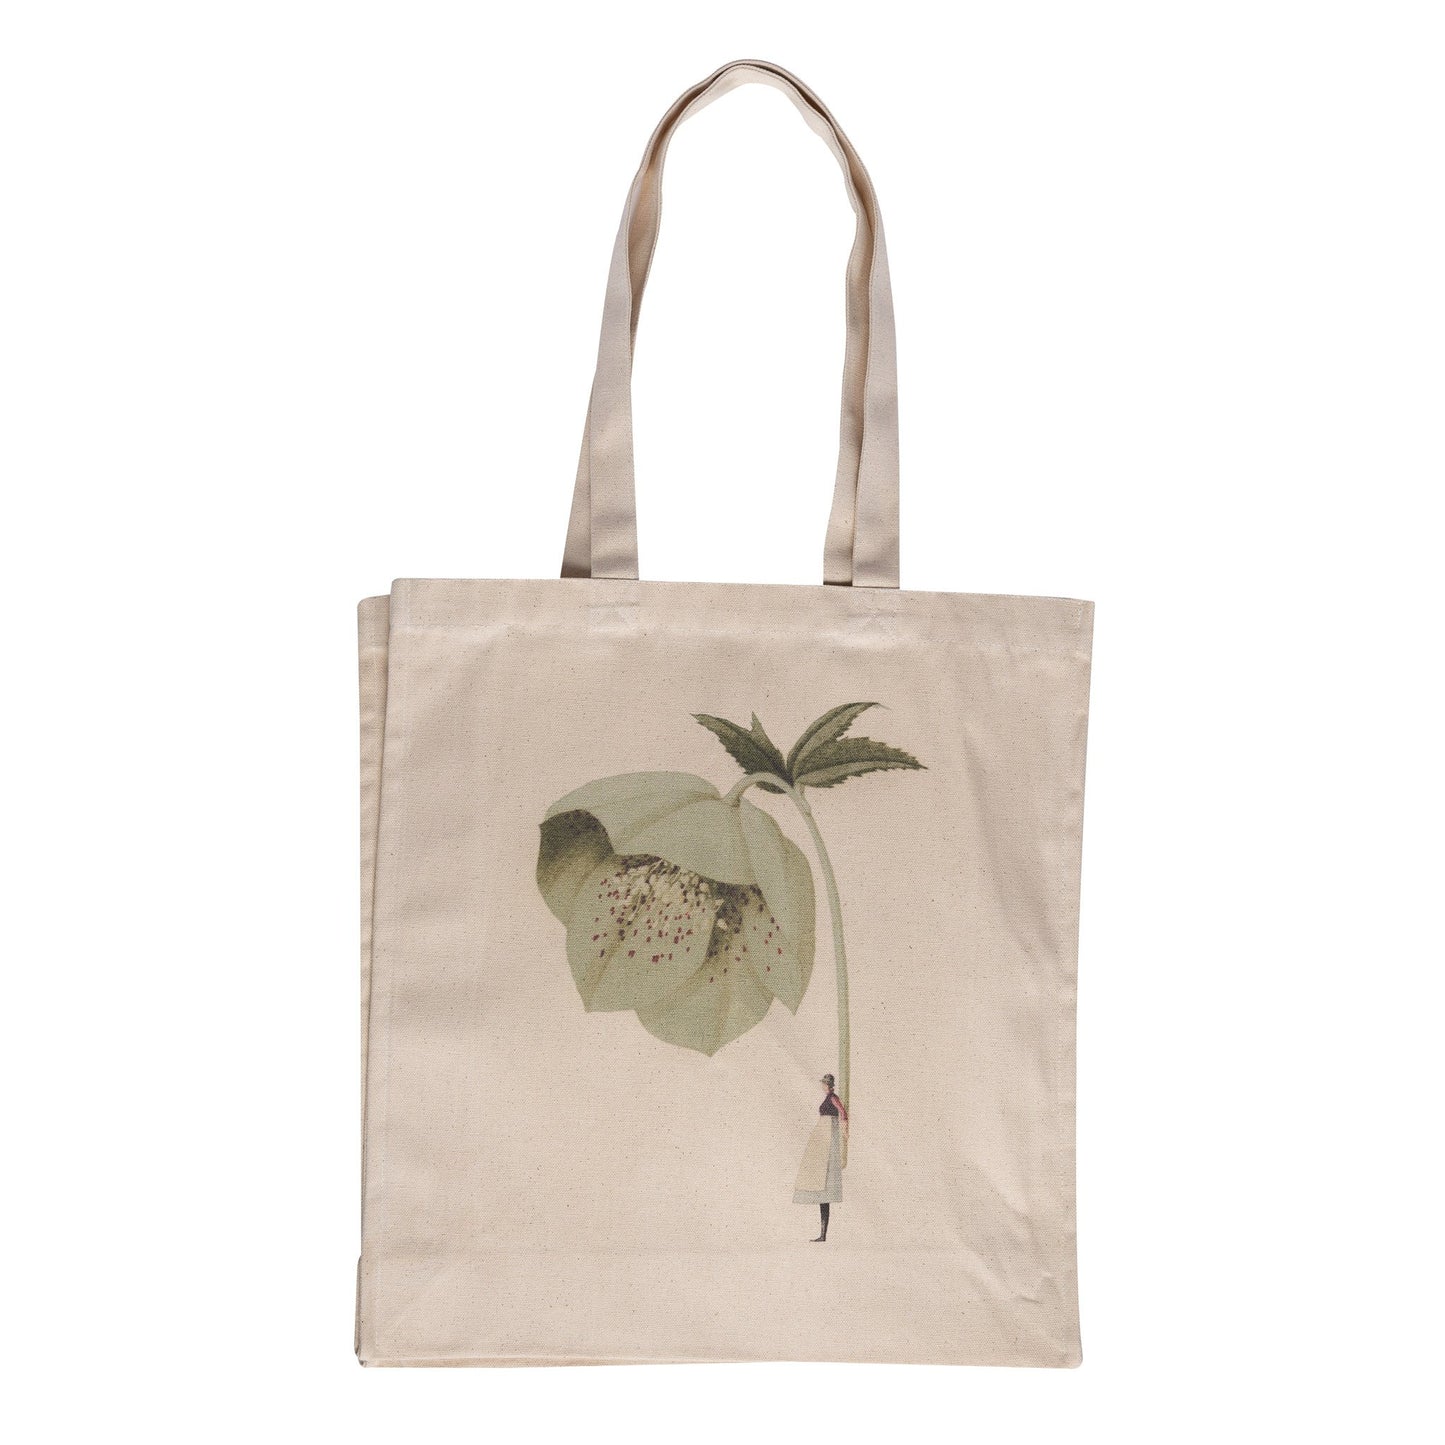 heavyweight cotton bag, made in England, illustration, unbleached cotton, green flowers, hellebore, bag